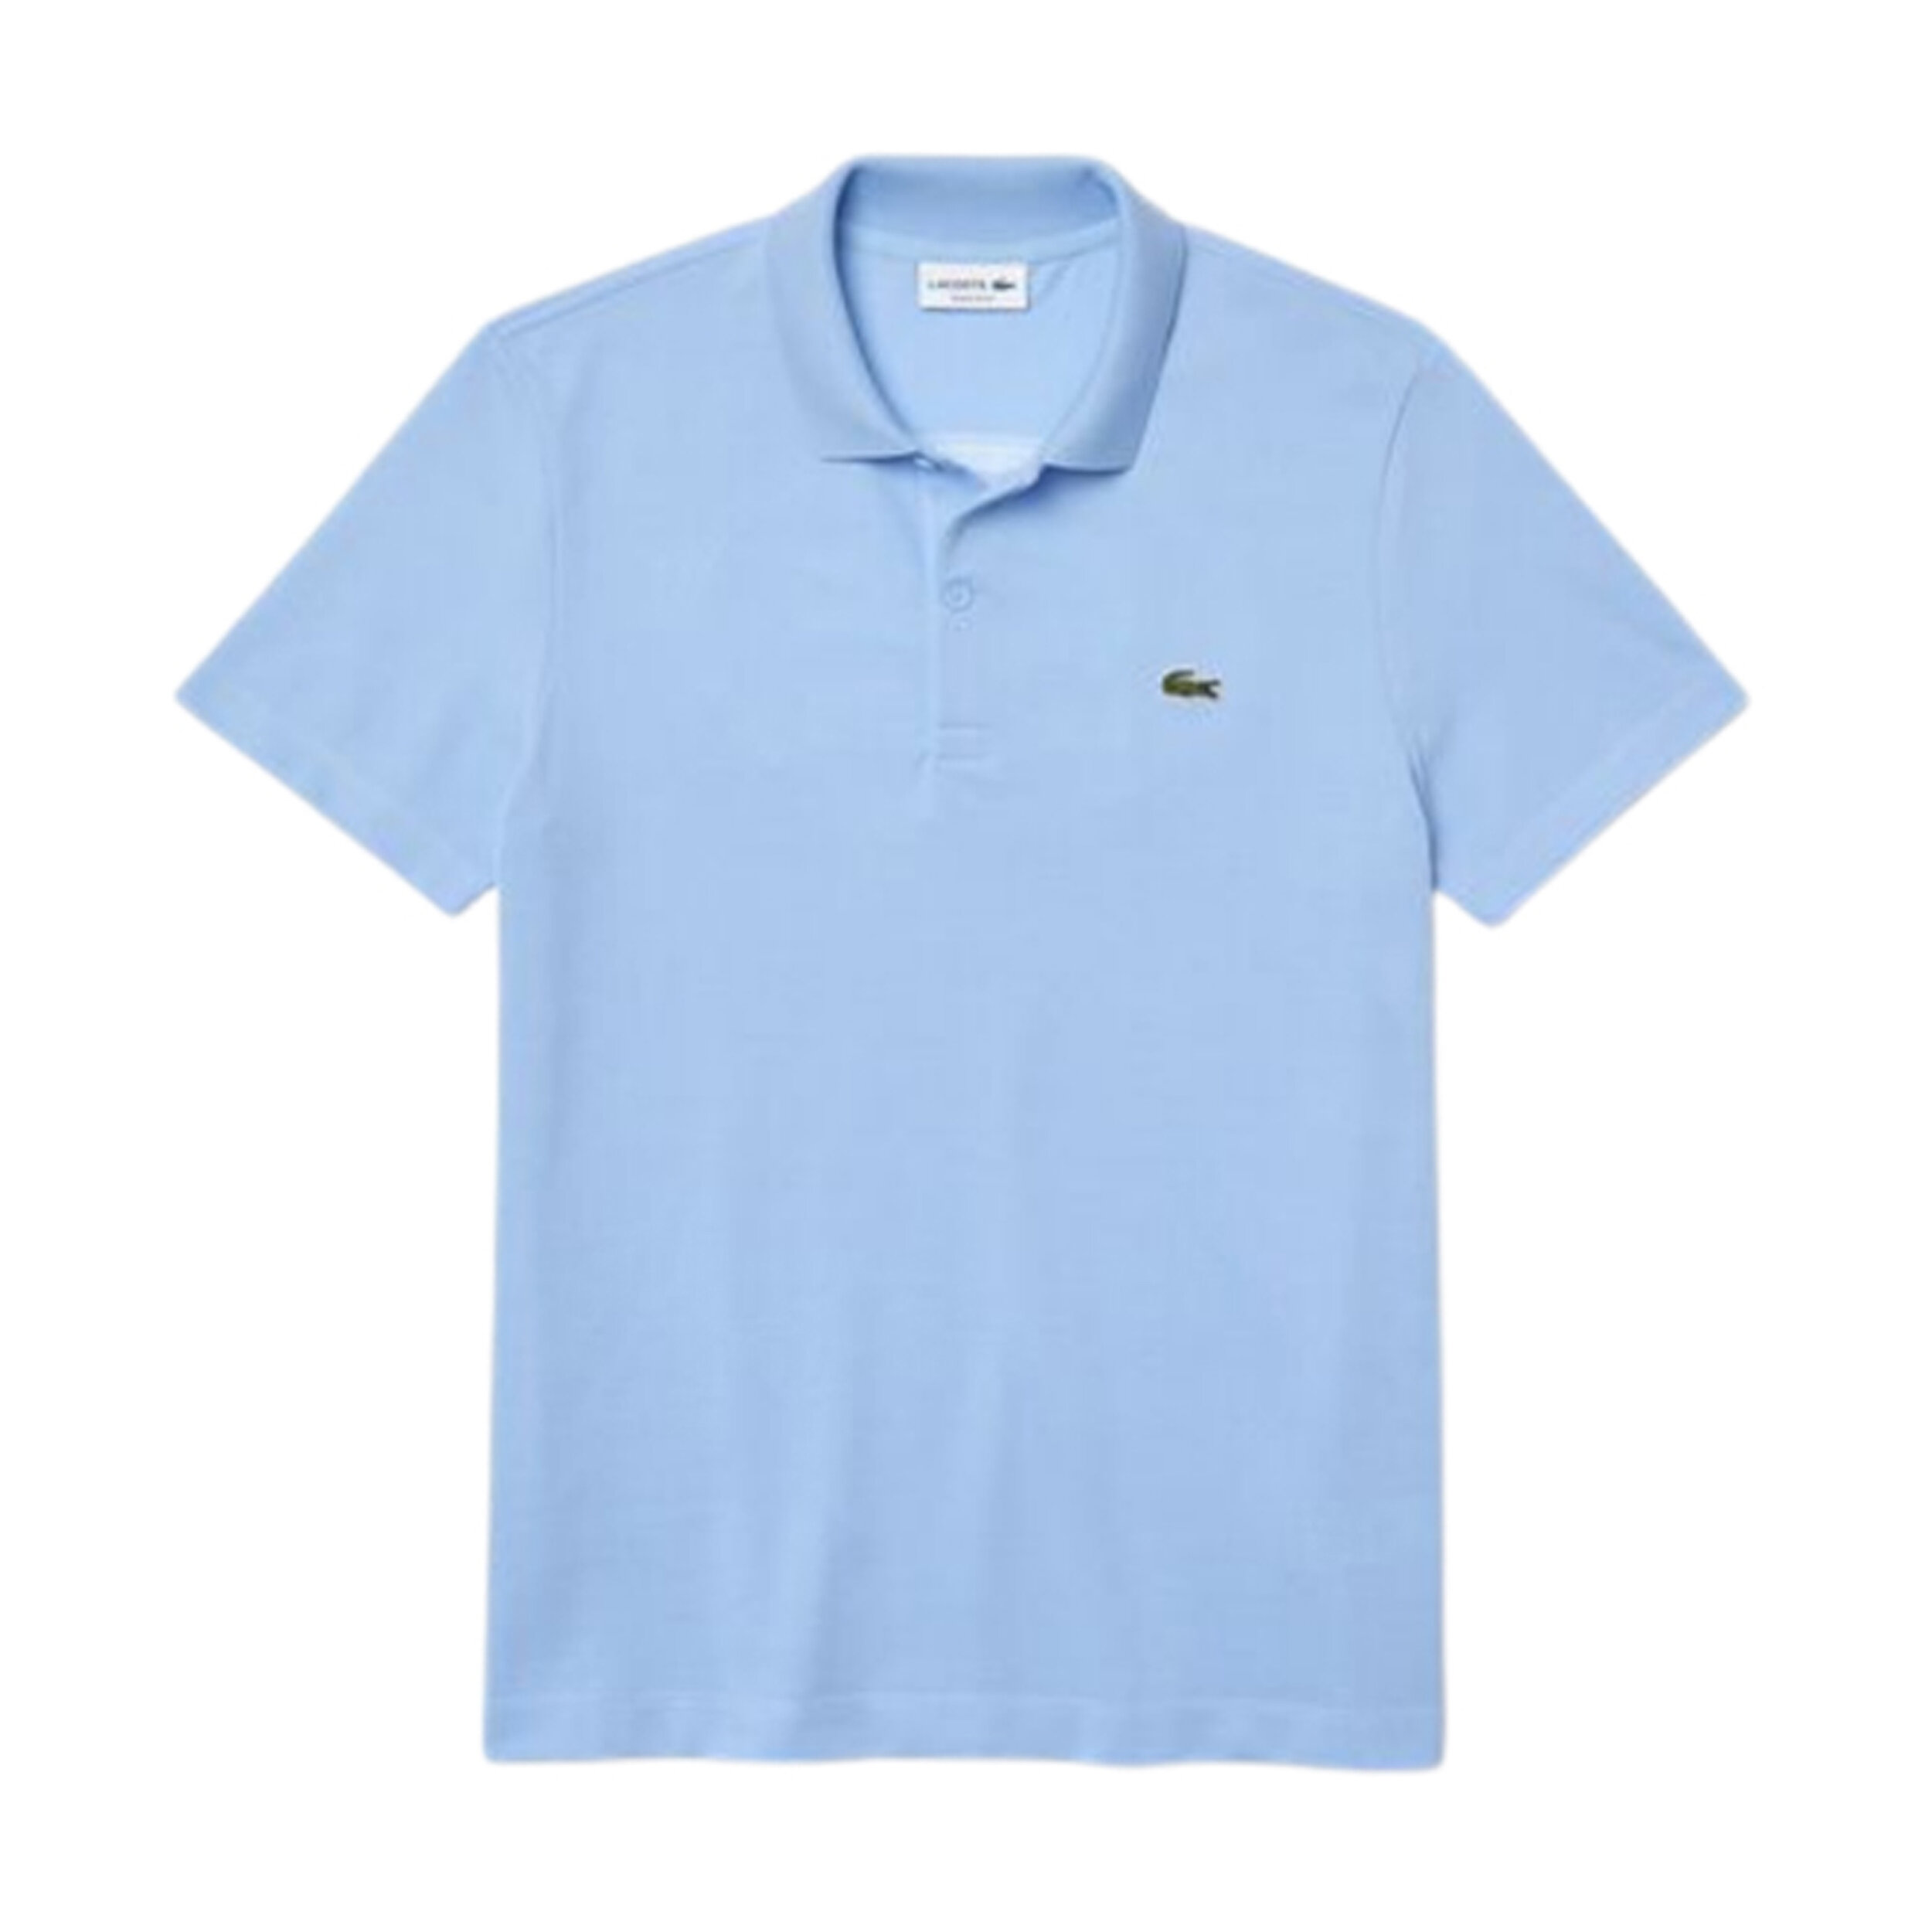  Mens Oversized Embroidered Badge Polo Shirt, Lacoste P6,950 